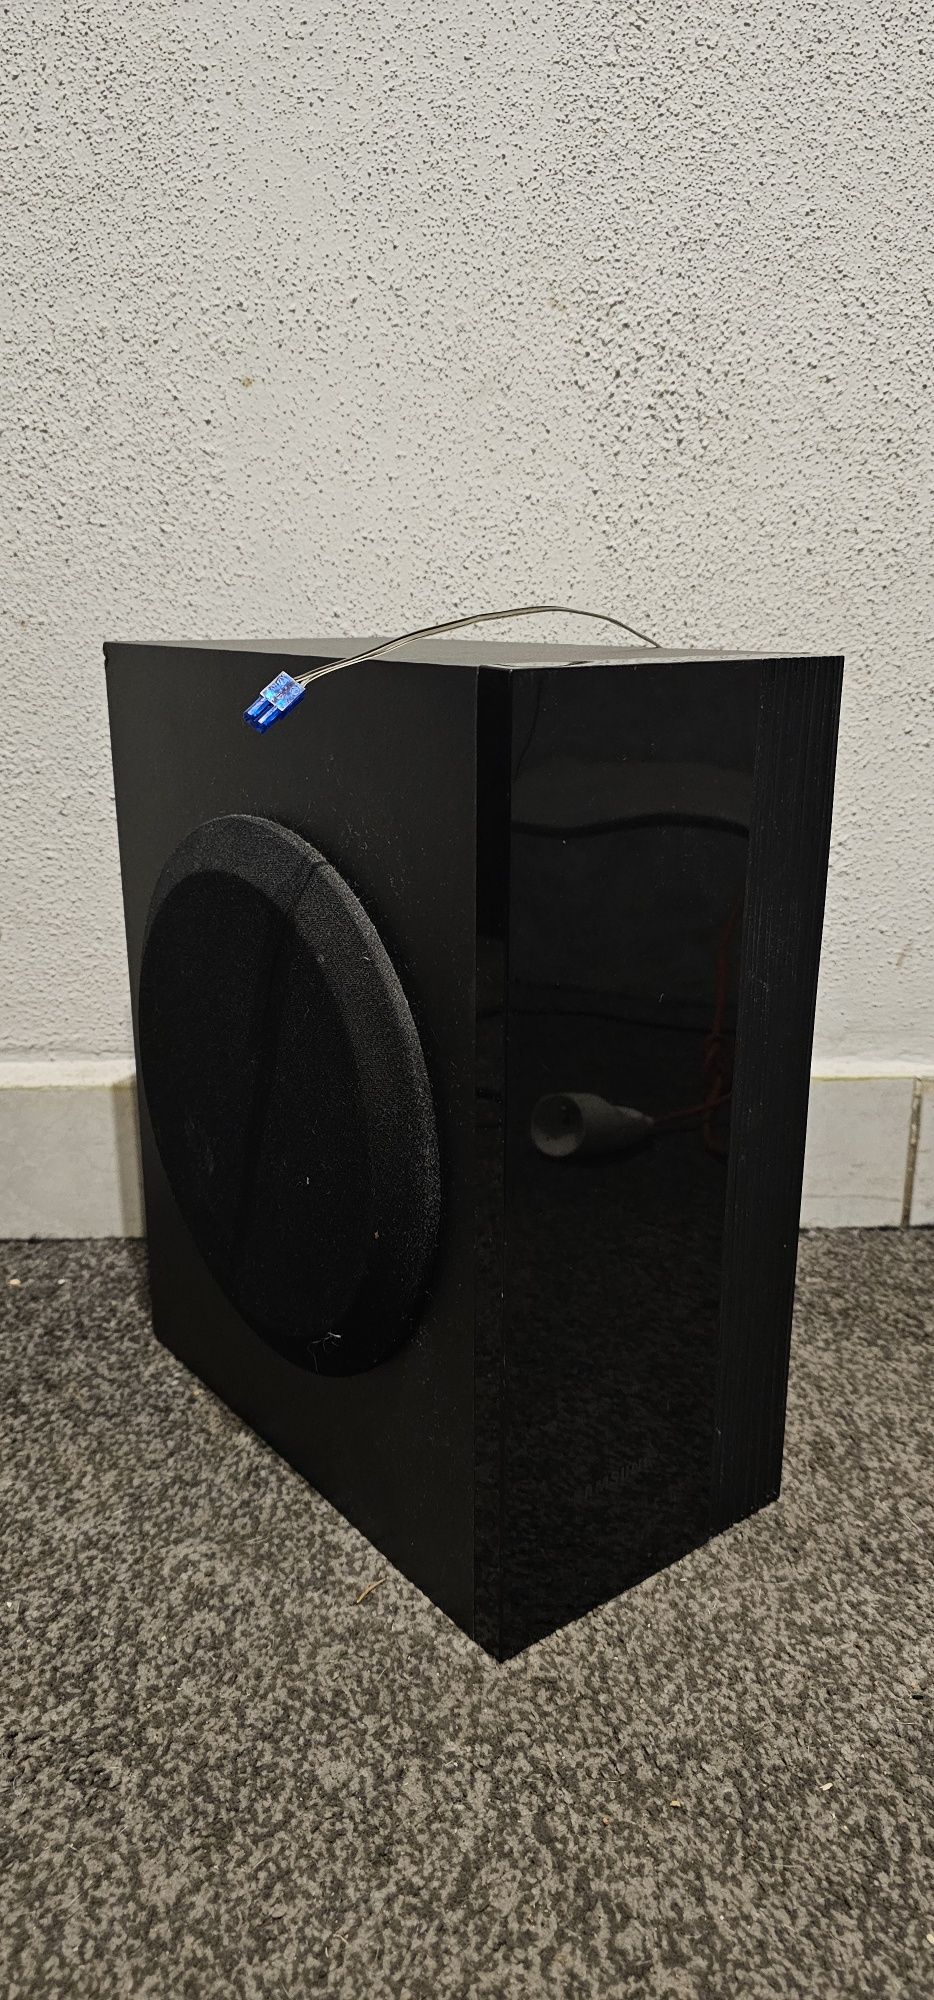 Subwoofer  samsung Ps Cwo